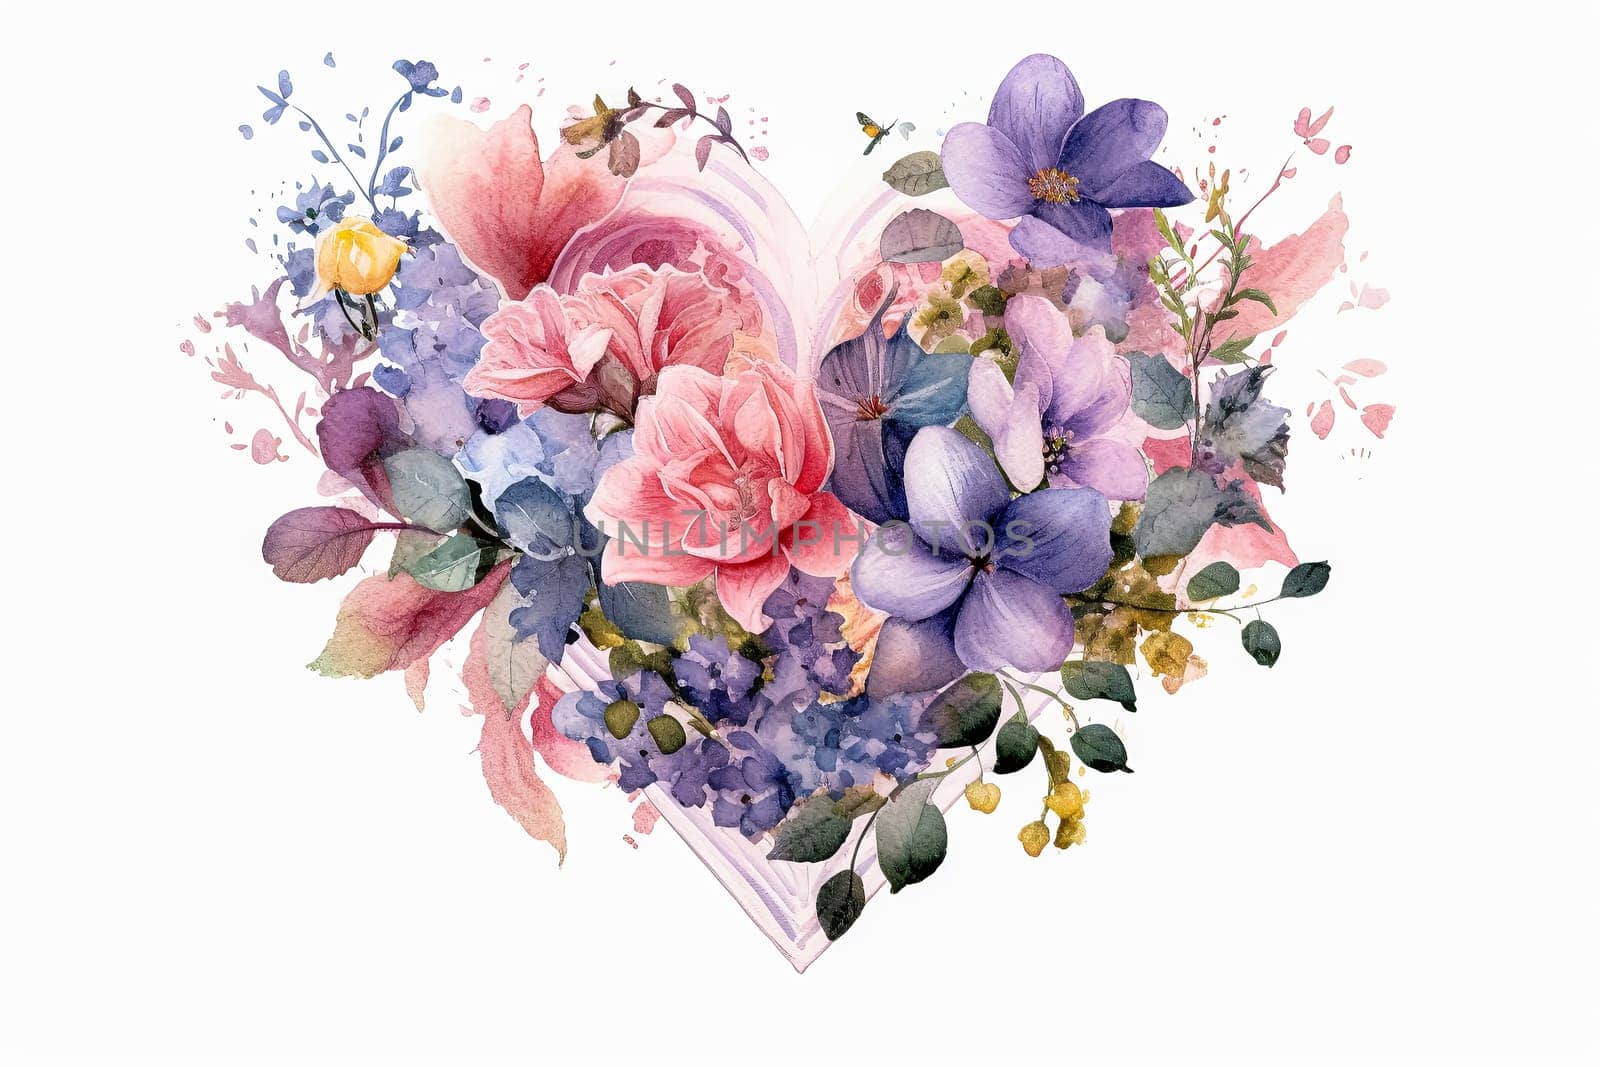 Dive into the romance with a watercolor illustration featuring heart shaped flowers, encapsulating the essence of Valentines Day in a vibrant and artistic concept.